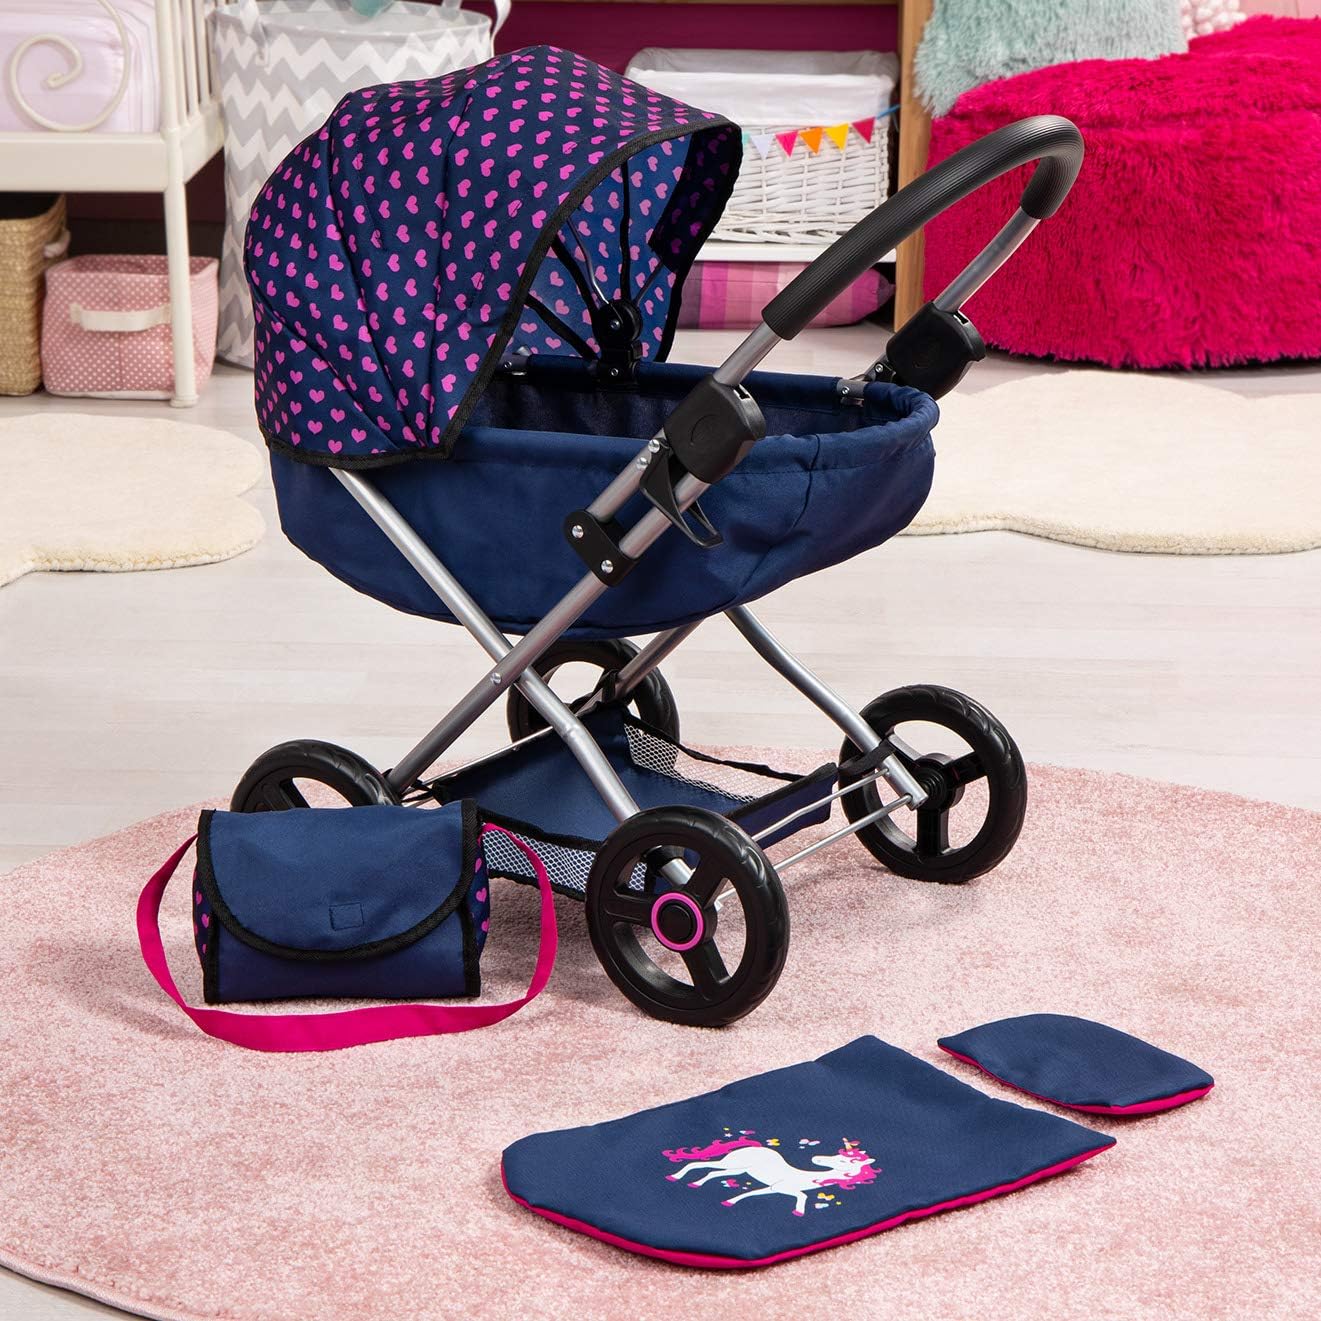 Bayer Dolls 4-in-1 Toy Baby Doll Pram Stroller Cosy Set - Dolls up to 18" (Blue/Purple) - image 8 of 10